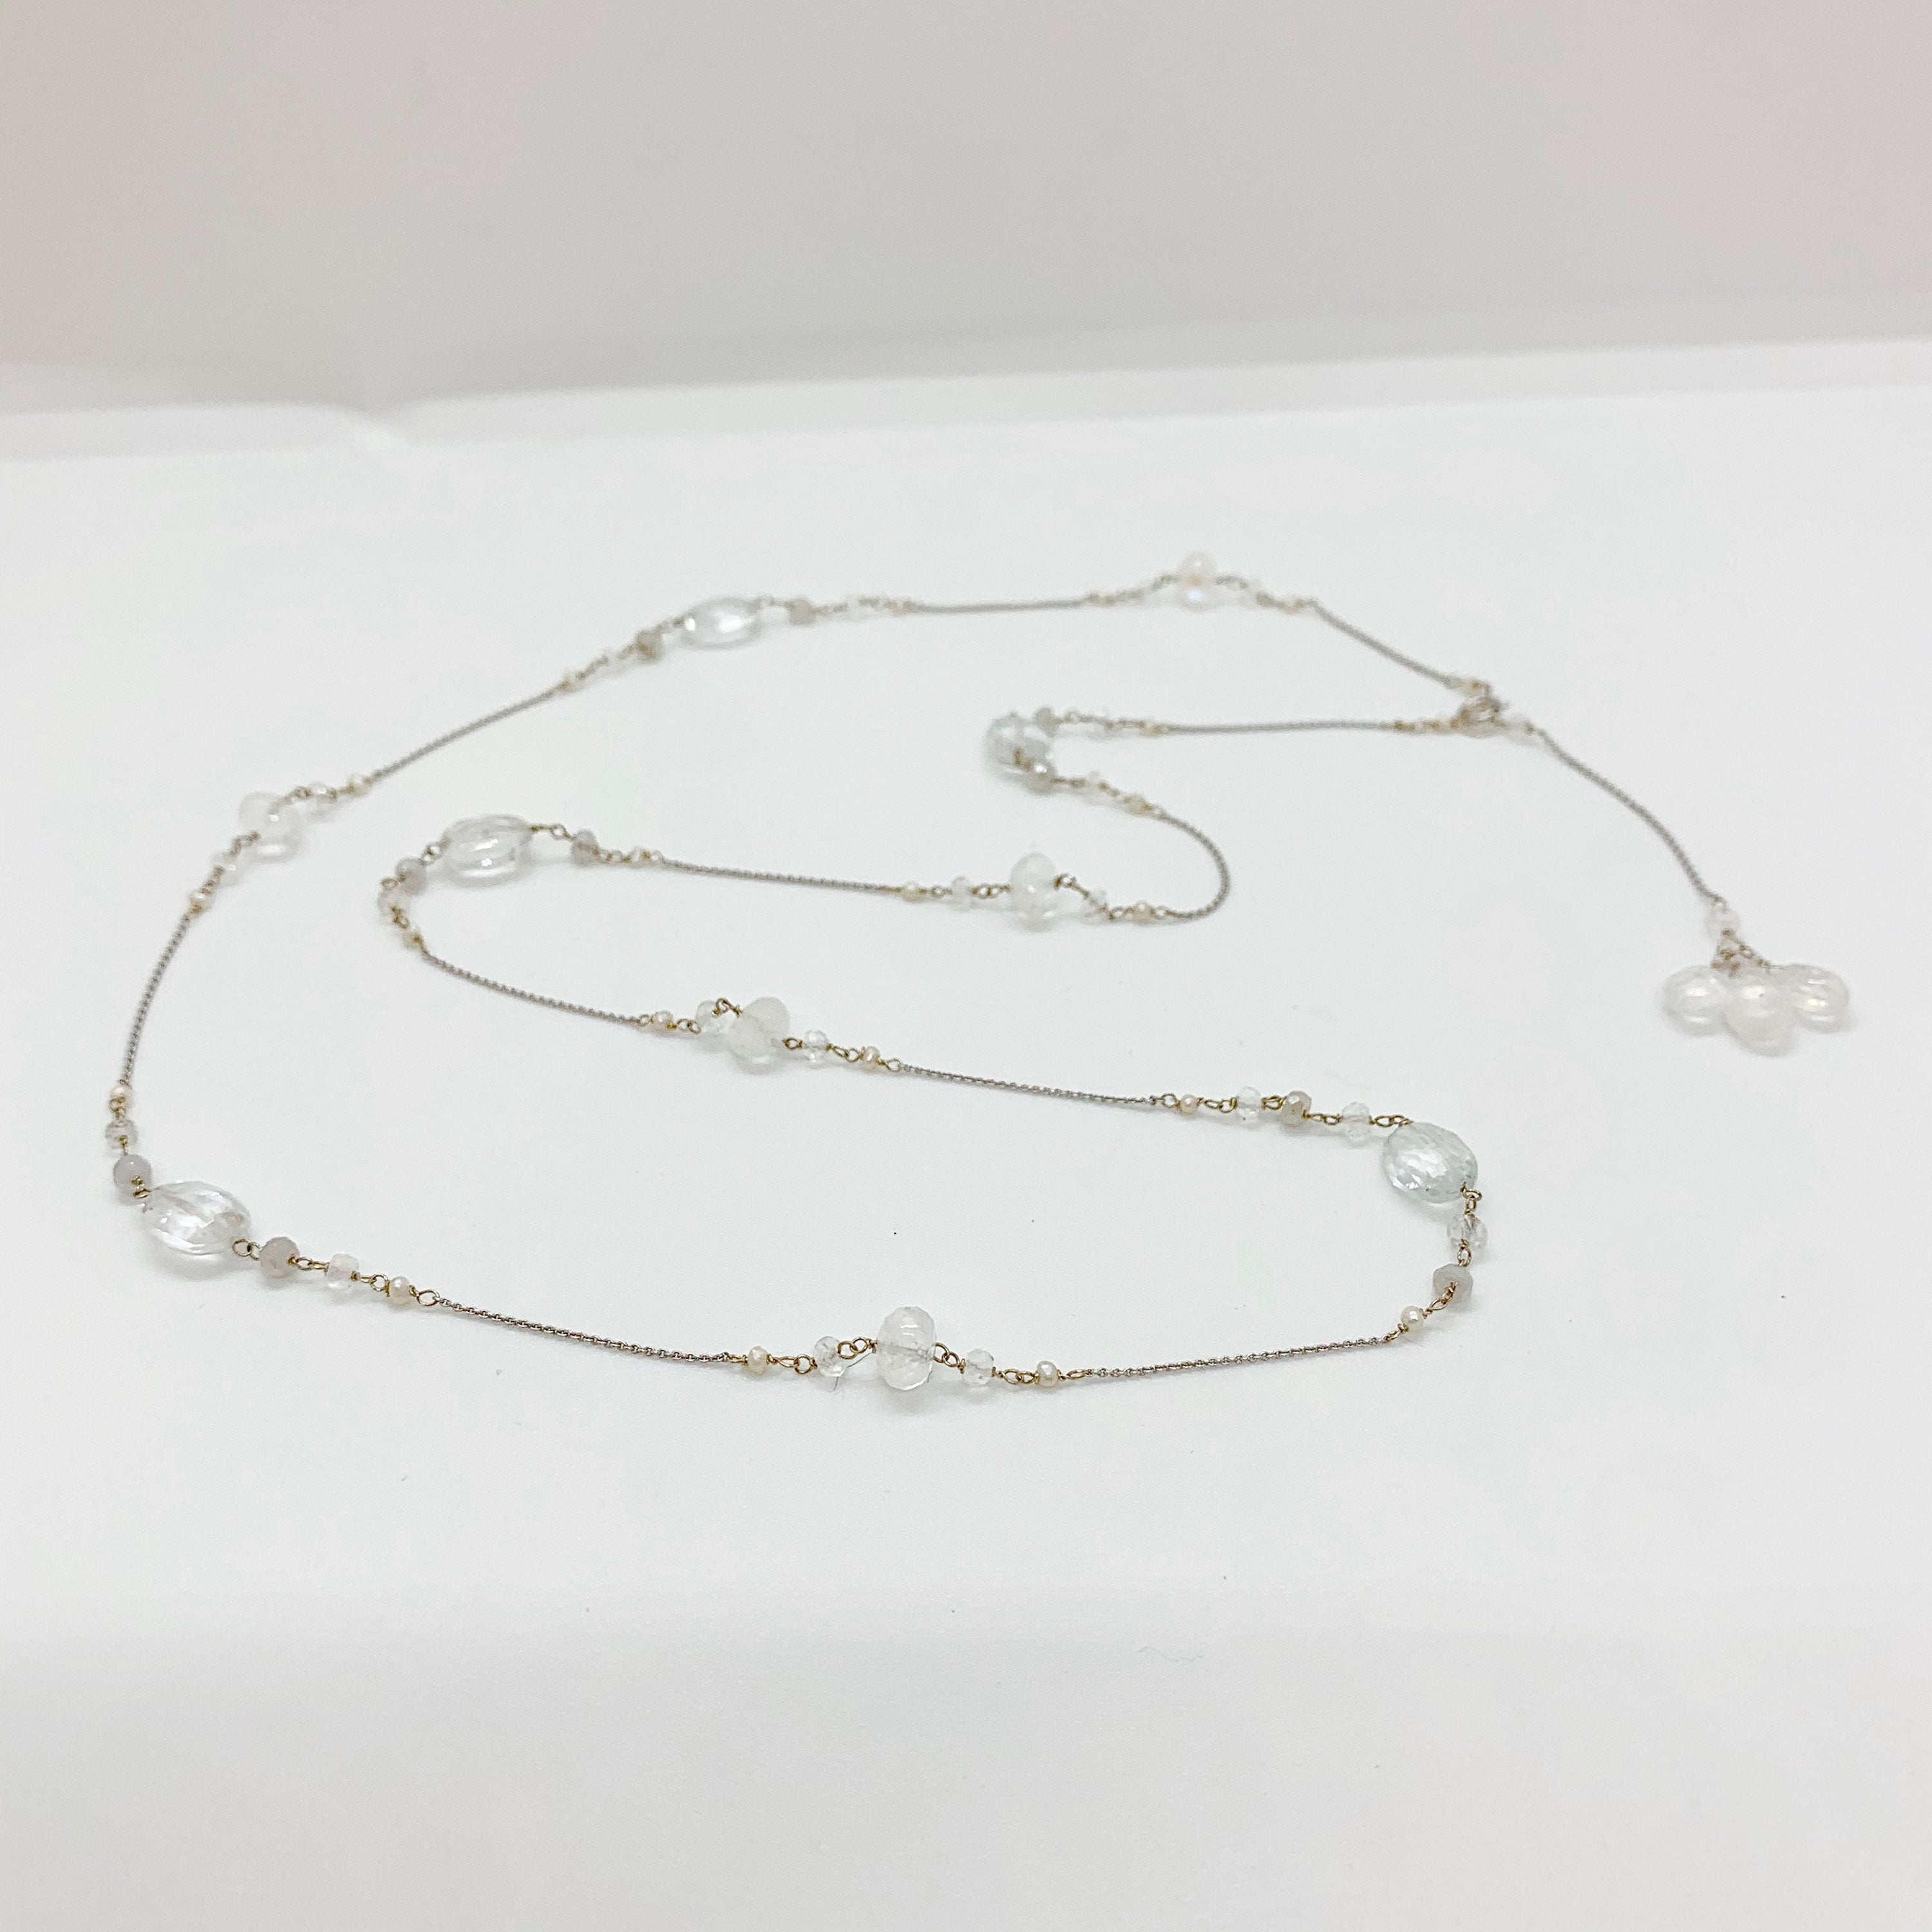 14K GOLD CHAIN Necklace - White Gold Necklace - Moonstone Necklace - Freshwater Pearls - Women Gold Jewelry - White Gold Chain